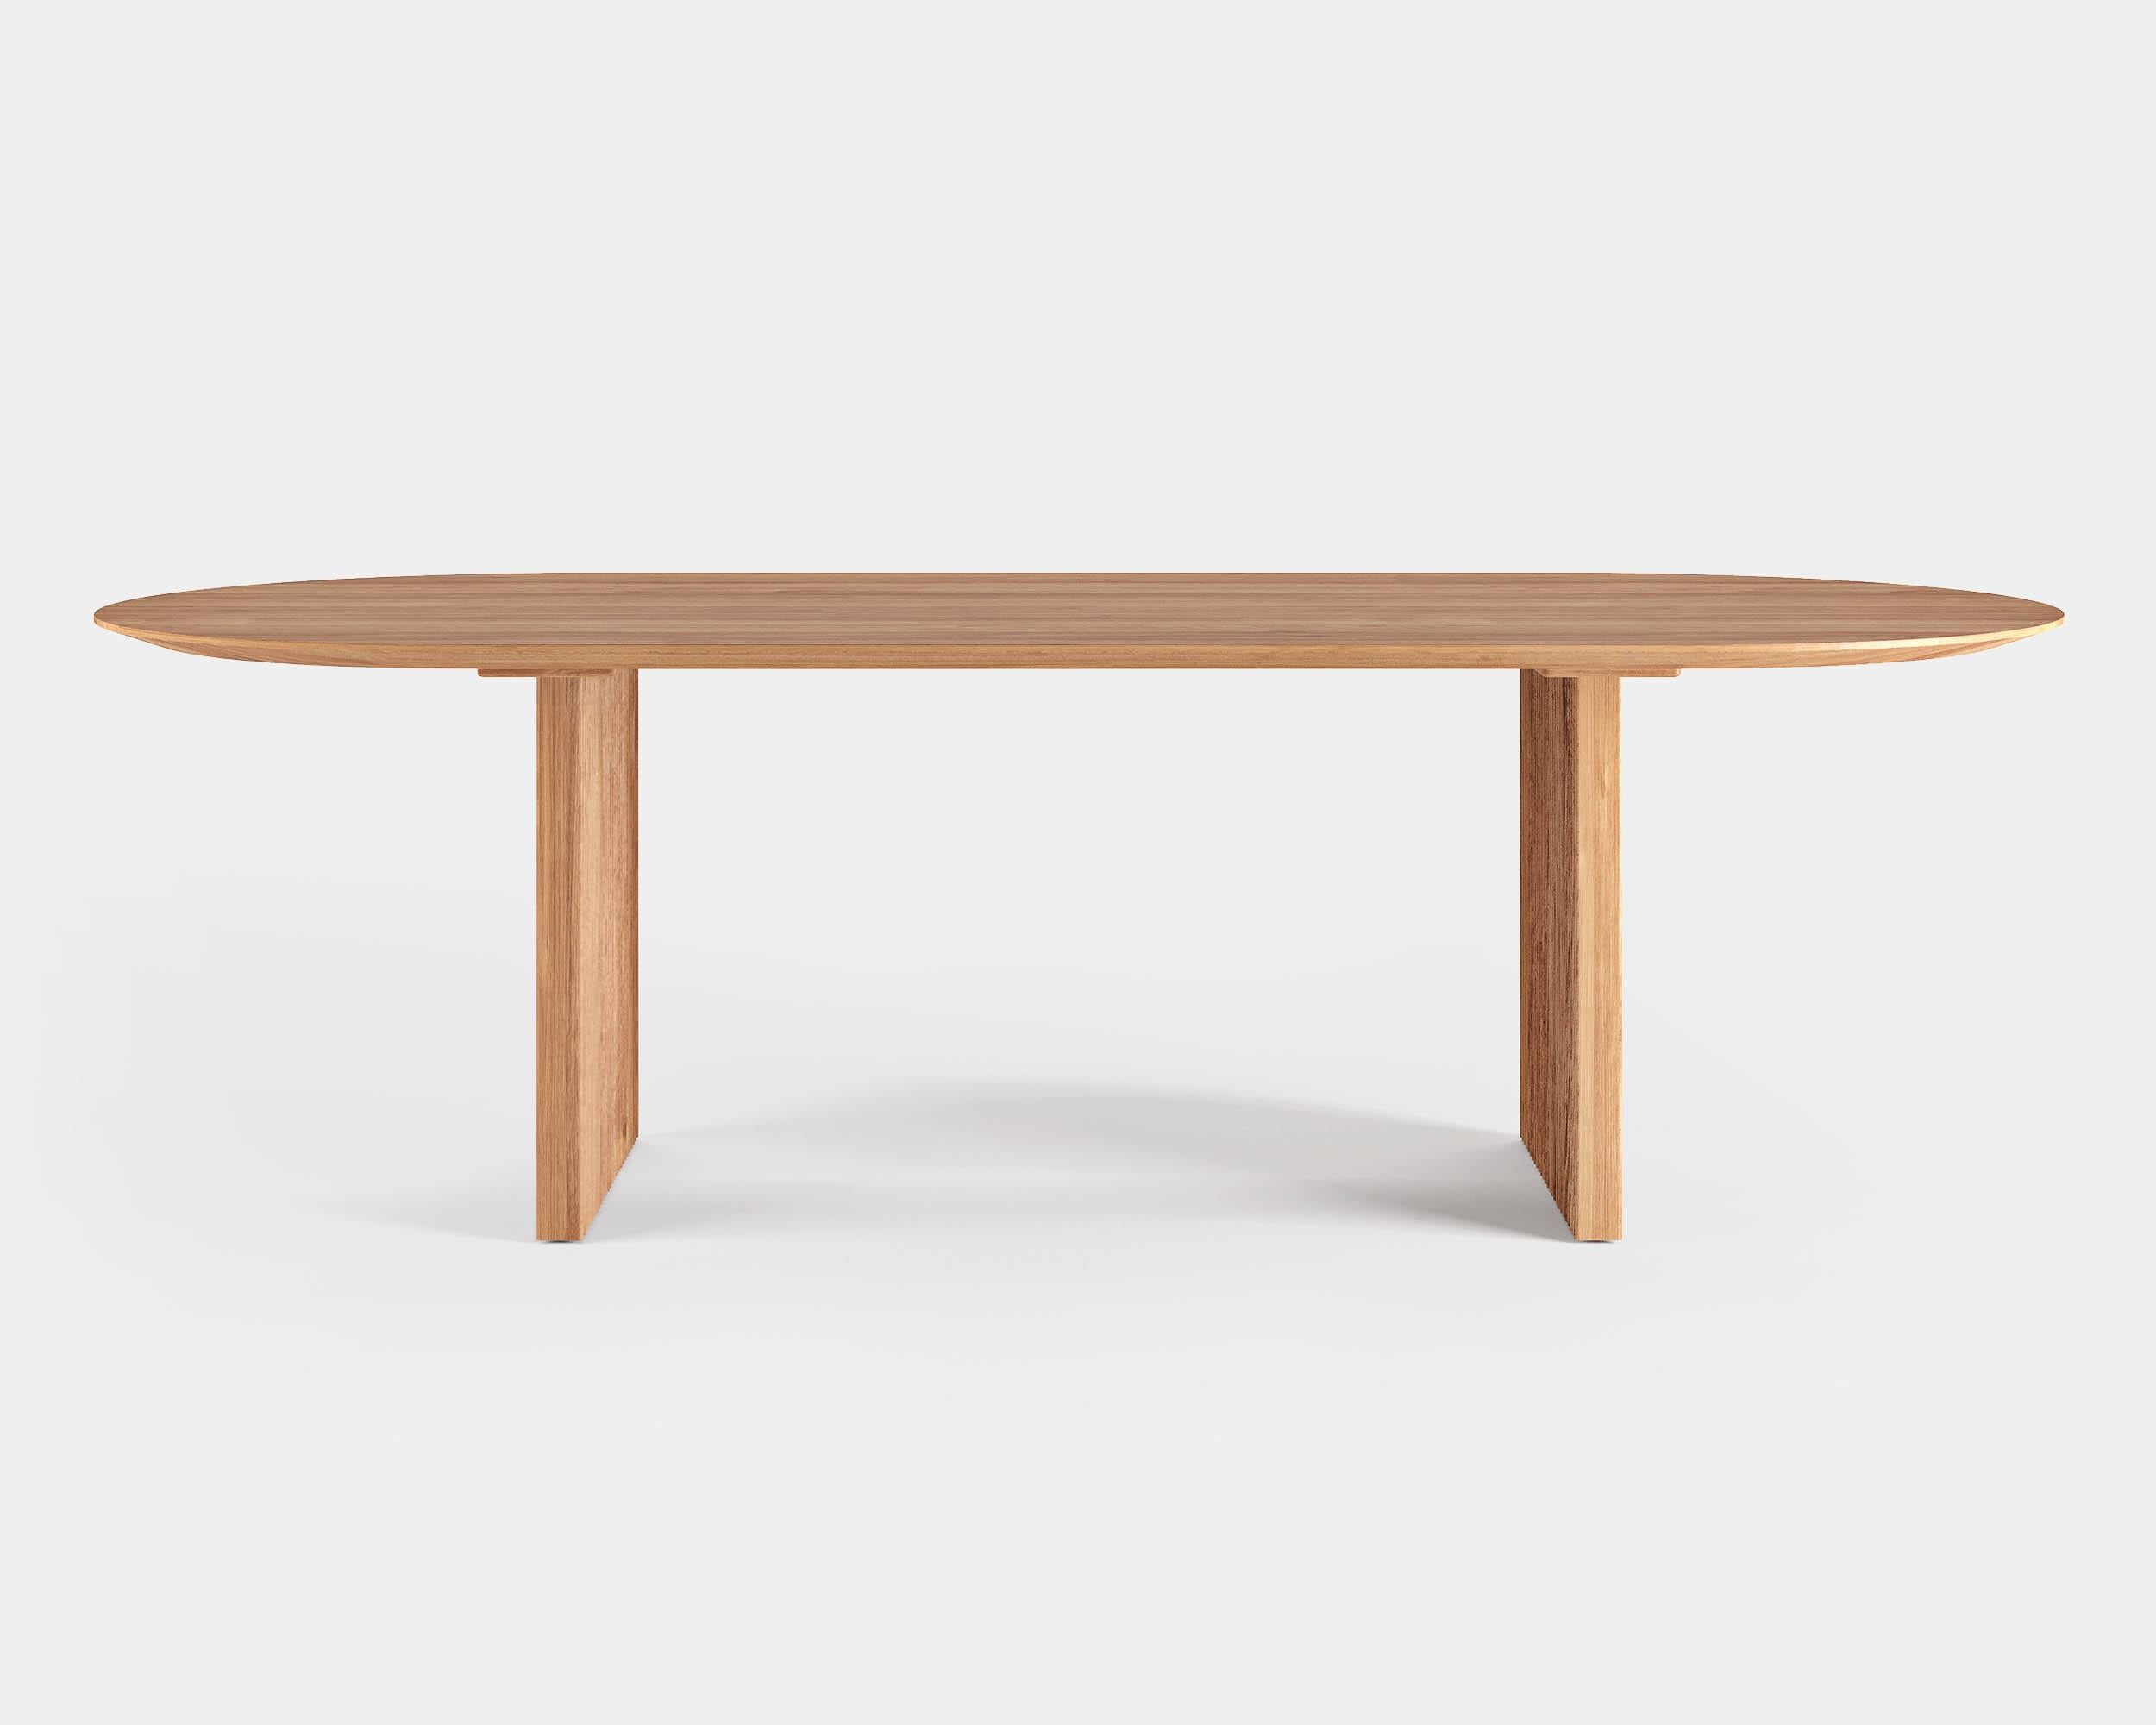 Ten dining table, oval, 300 cm.
Solid wood table top and legs. Handmade in Denmark. 

Measures: height: 72 or 74 cm.

Table top dimensions:
– 200 x 95 cm
– 240 x 105 cm
– 270 x 105 cm
– 300 x 105 cm
– 340 x 105 cm
– 370 x 105 cm
– 400 x